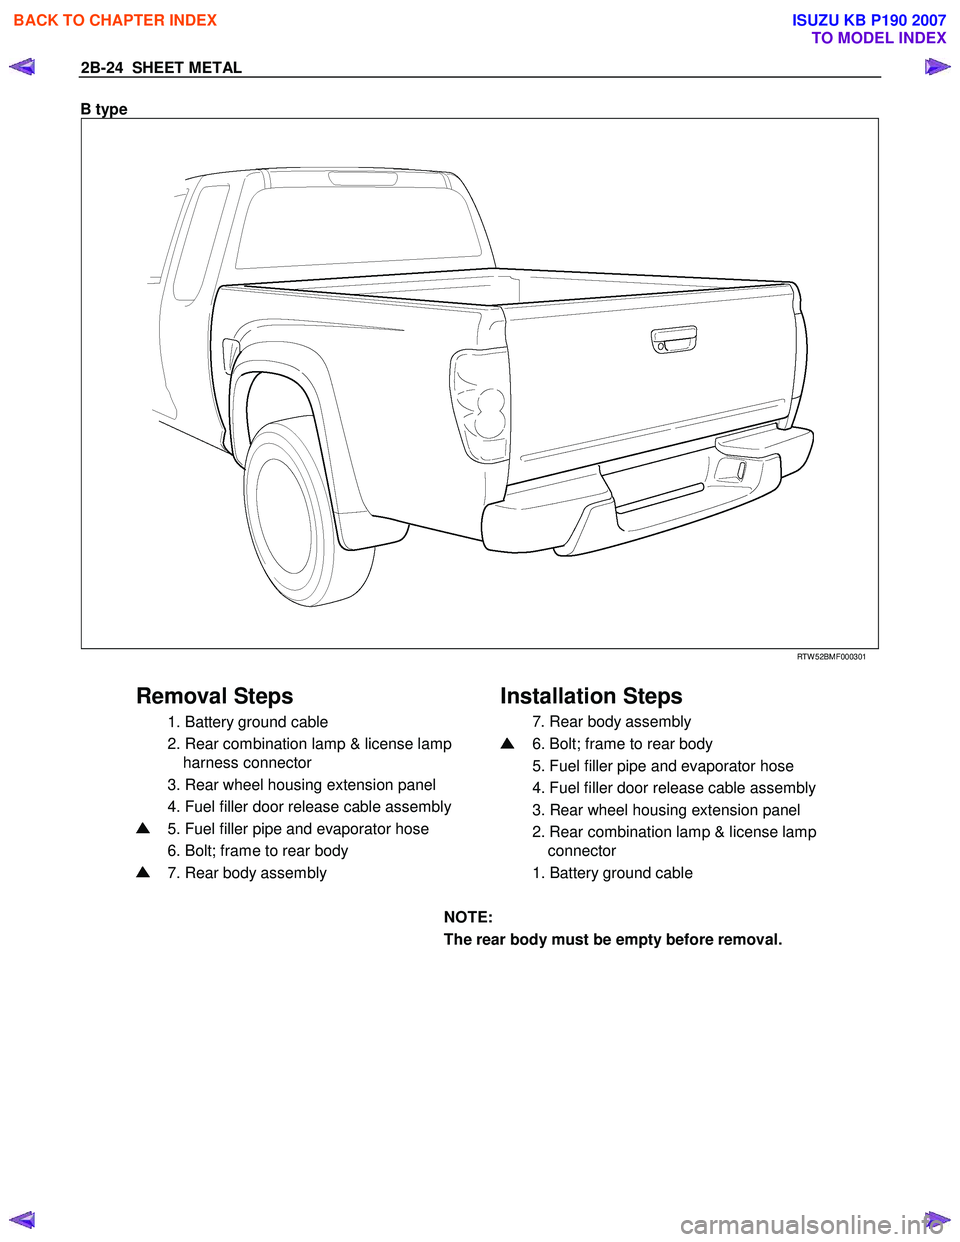 ISUZU KB P190 2007  Workshop User Guide 2B-24  SHEET METAL 
B type  
 
 RTW 52BMF000301 
 
Removal Steps   Installation Steps 
  1. Battery ground cable  
  2. Rear combination lamp & license lamp 
harness connector  
  3. Rear wheel housin